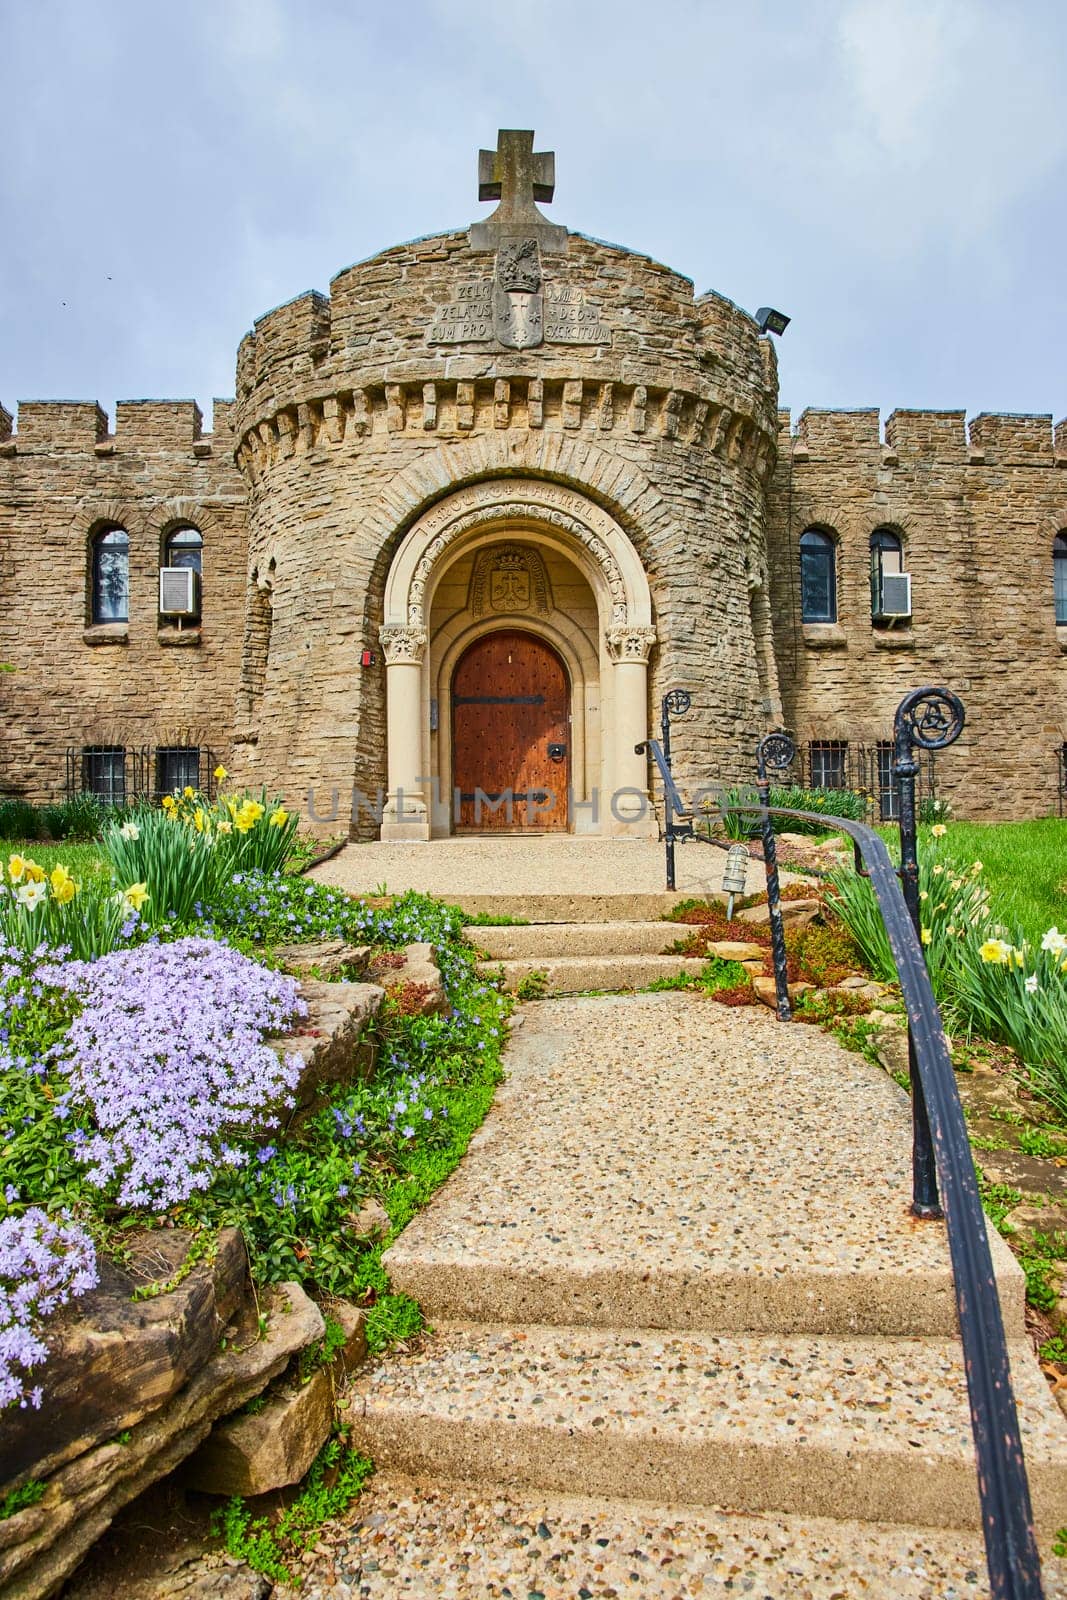 Springtime at Bishop Simon Brute College, showcasing an inviting entrance of a medieval-style stone castle with vibrant floral surrounds.